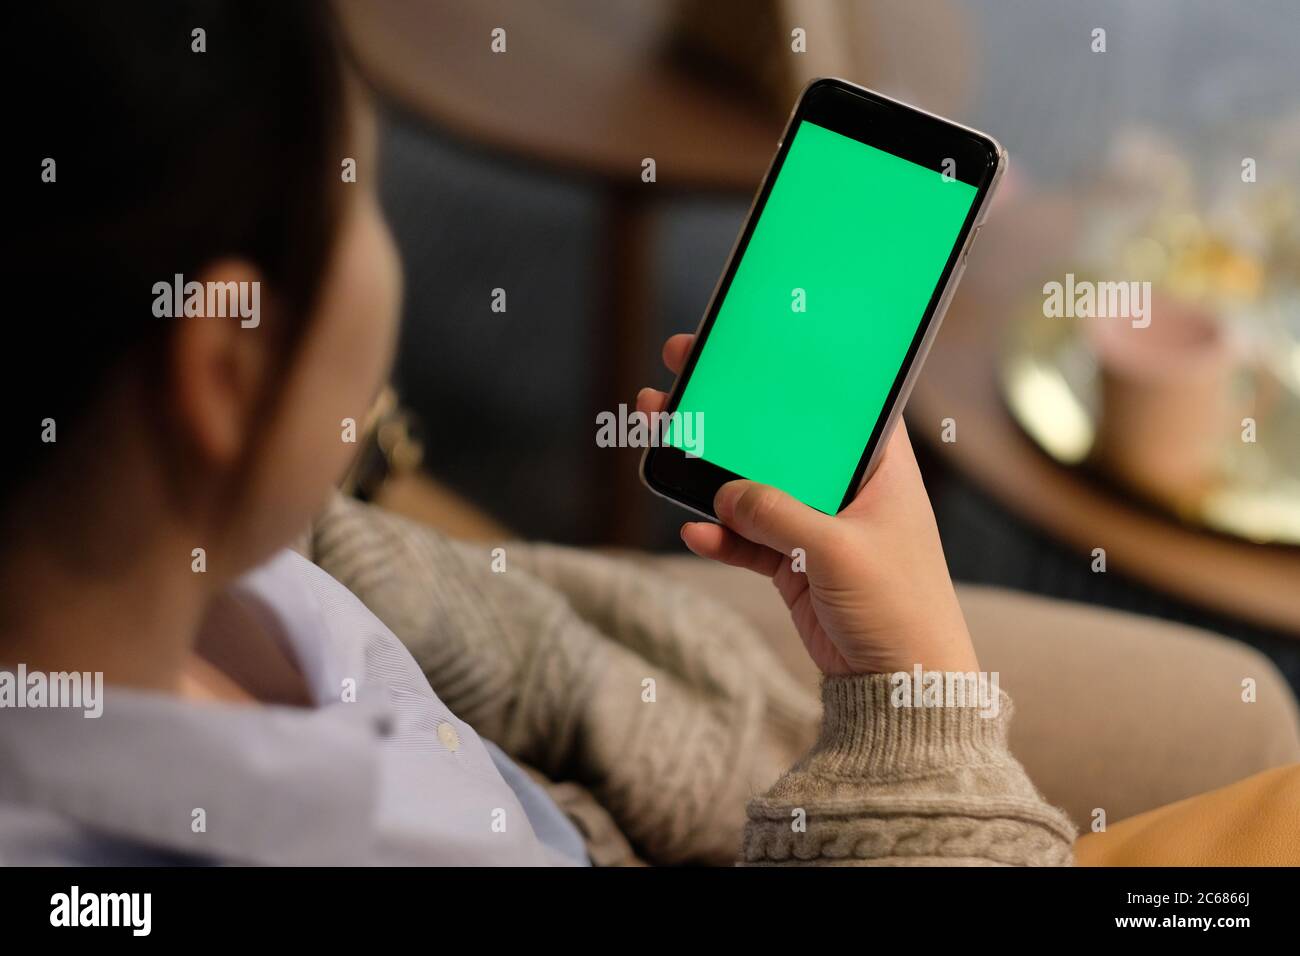 over shoulder of one young woman holding a green screen smartphone in living room at night. blur background Stock Photo